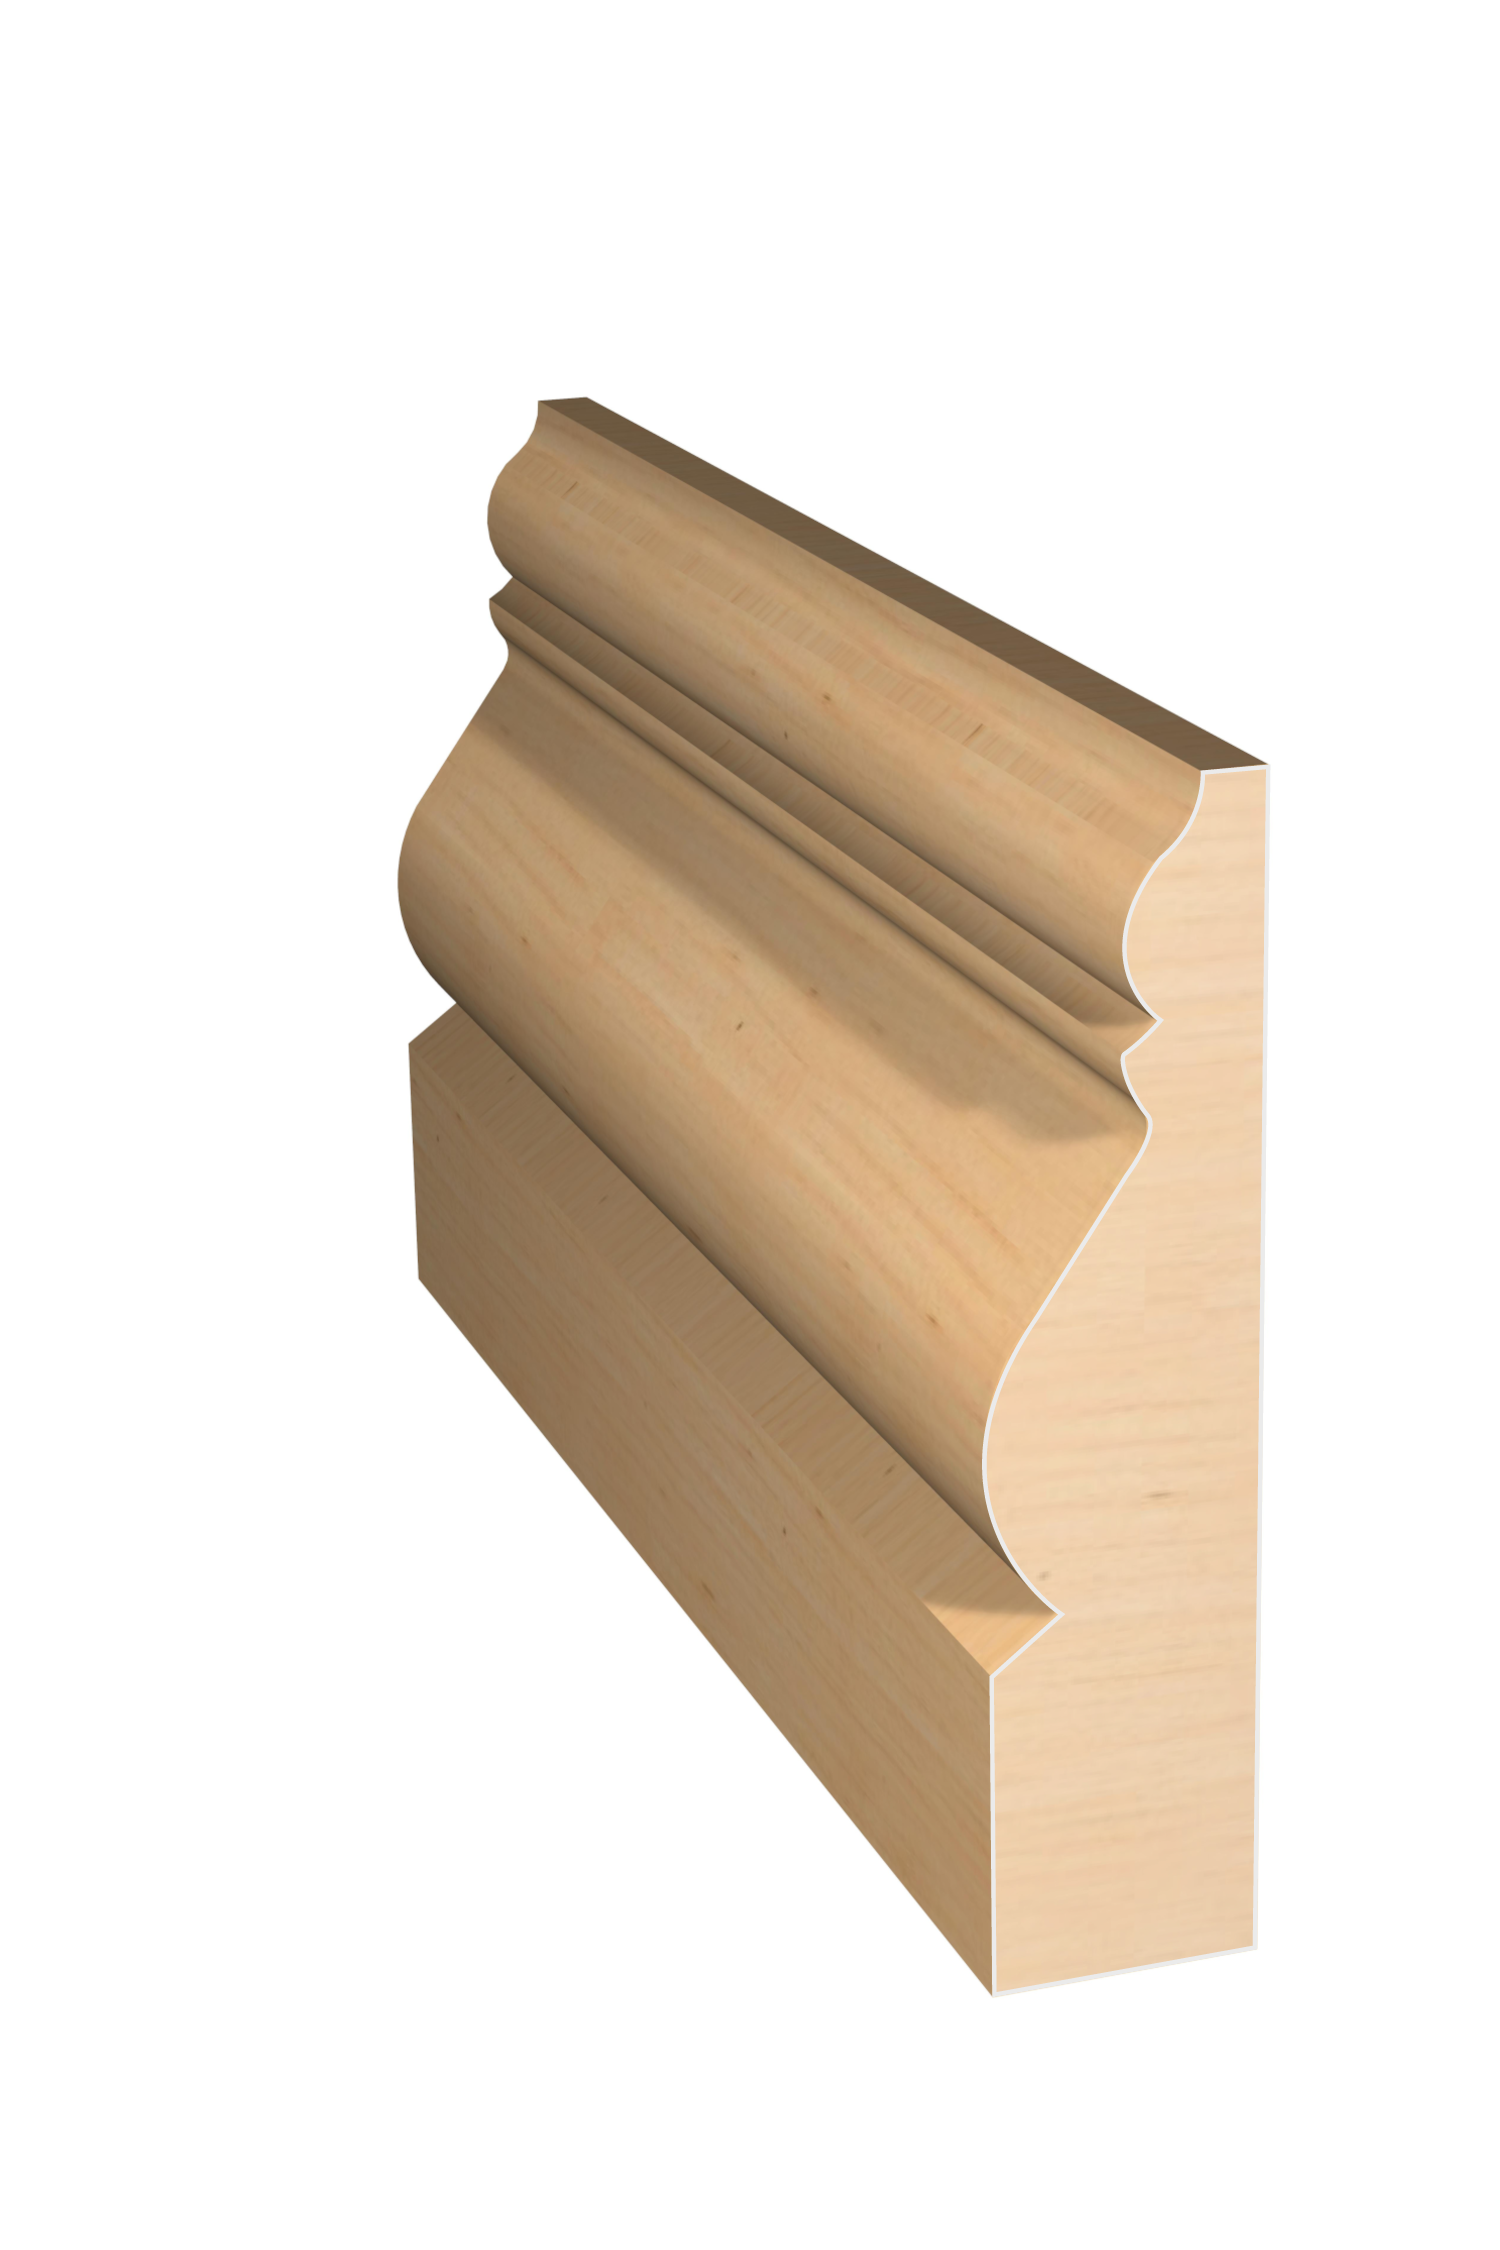 Three dimensional rendering of traditional stock casing wood molding CAPL31418 made by Public Lumber Company in Detroit.